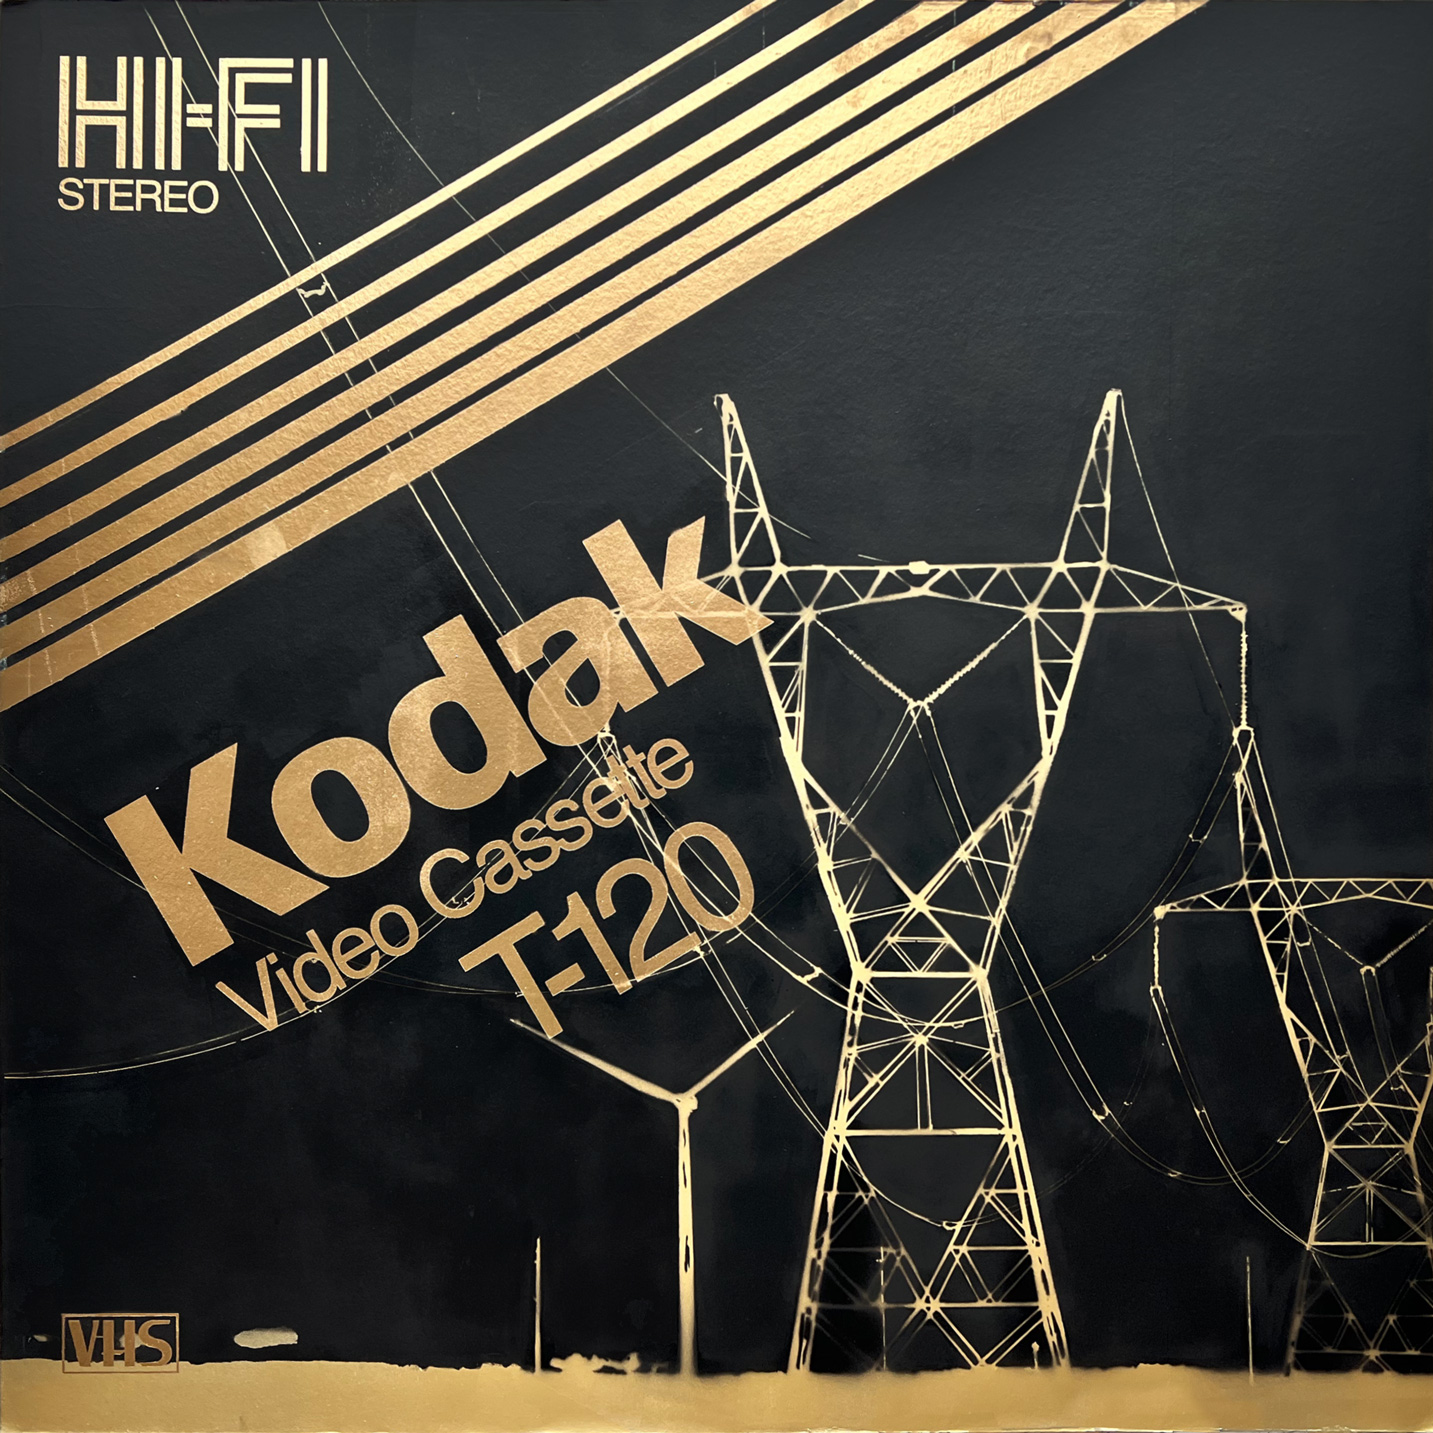 Kodak video cassette cover with pylons in gold